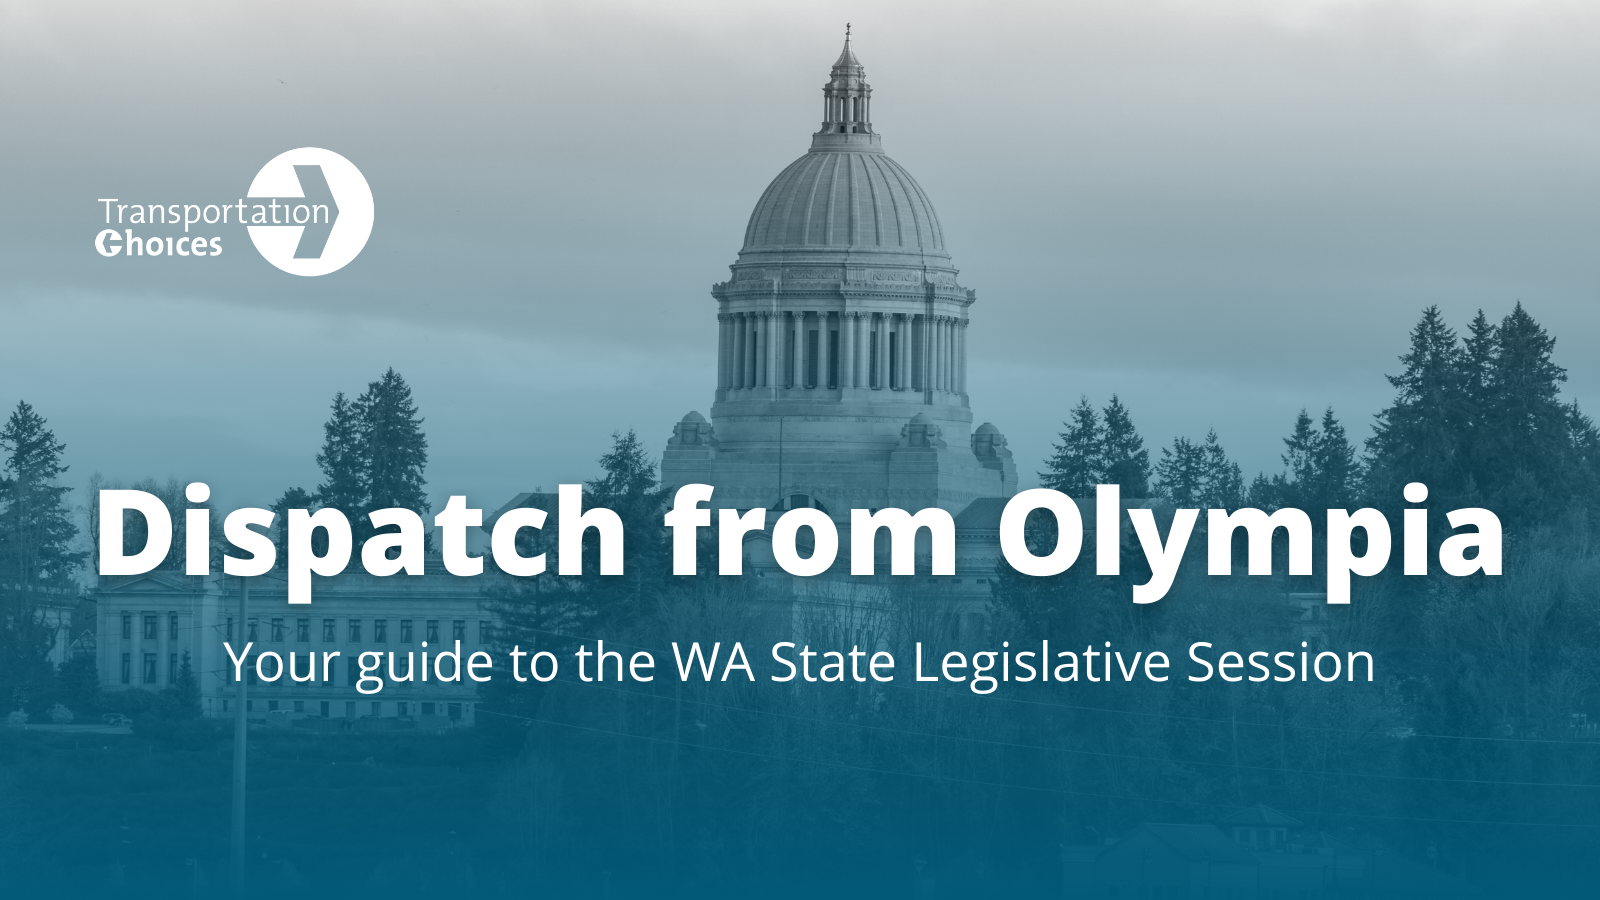 Image of the WA State capitol building, with TCC logo and text: Dispatch from Olympia / Your guide to the WA State Legislative Session